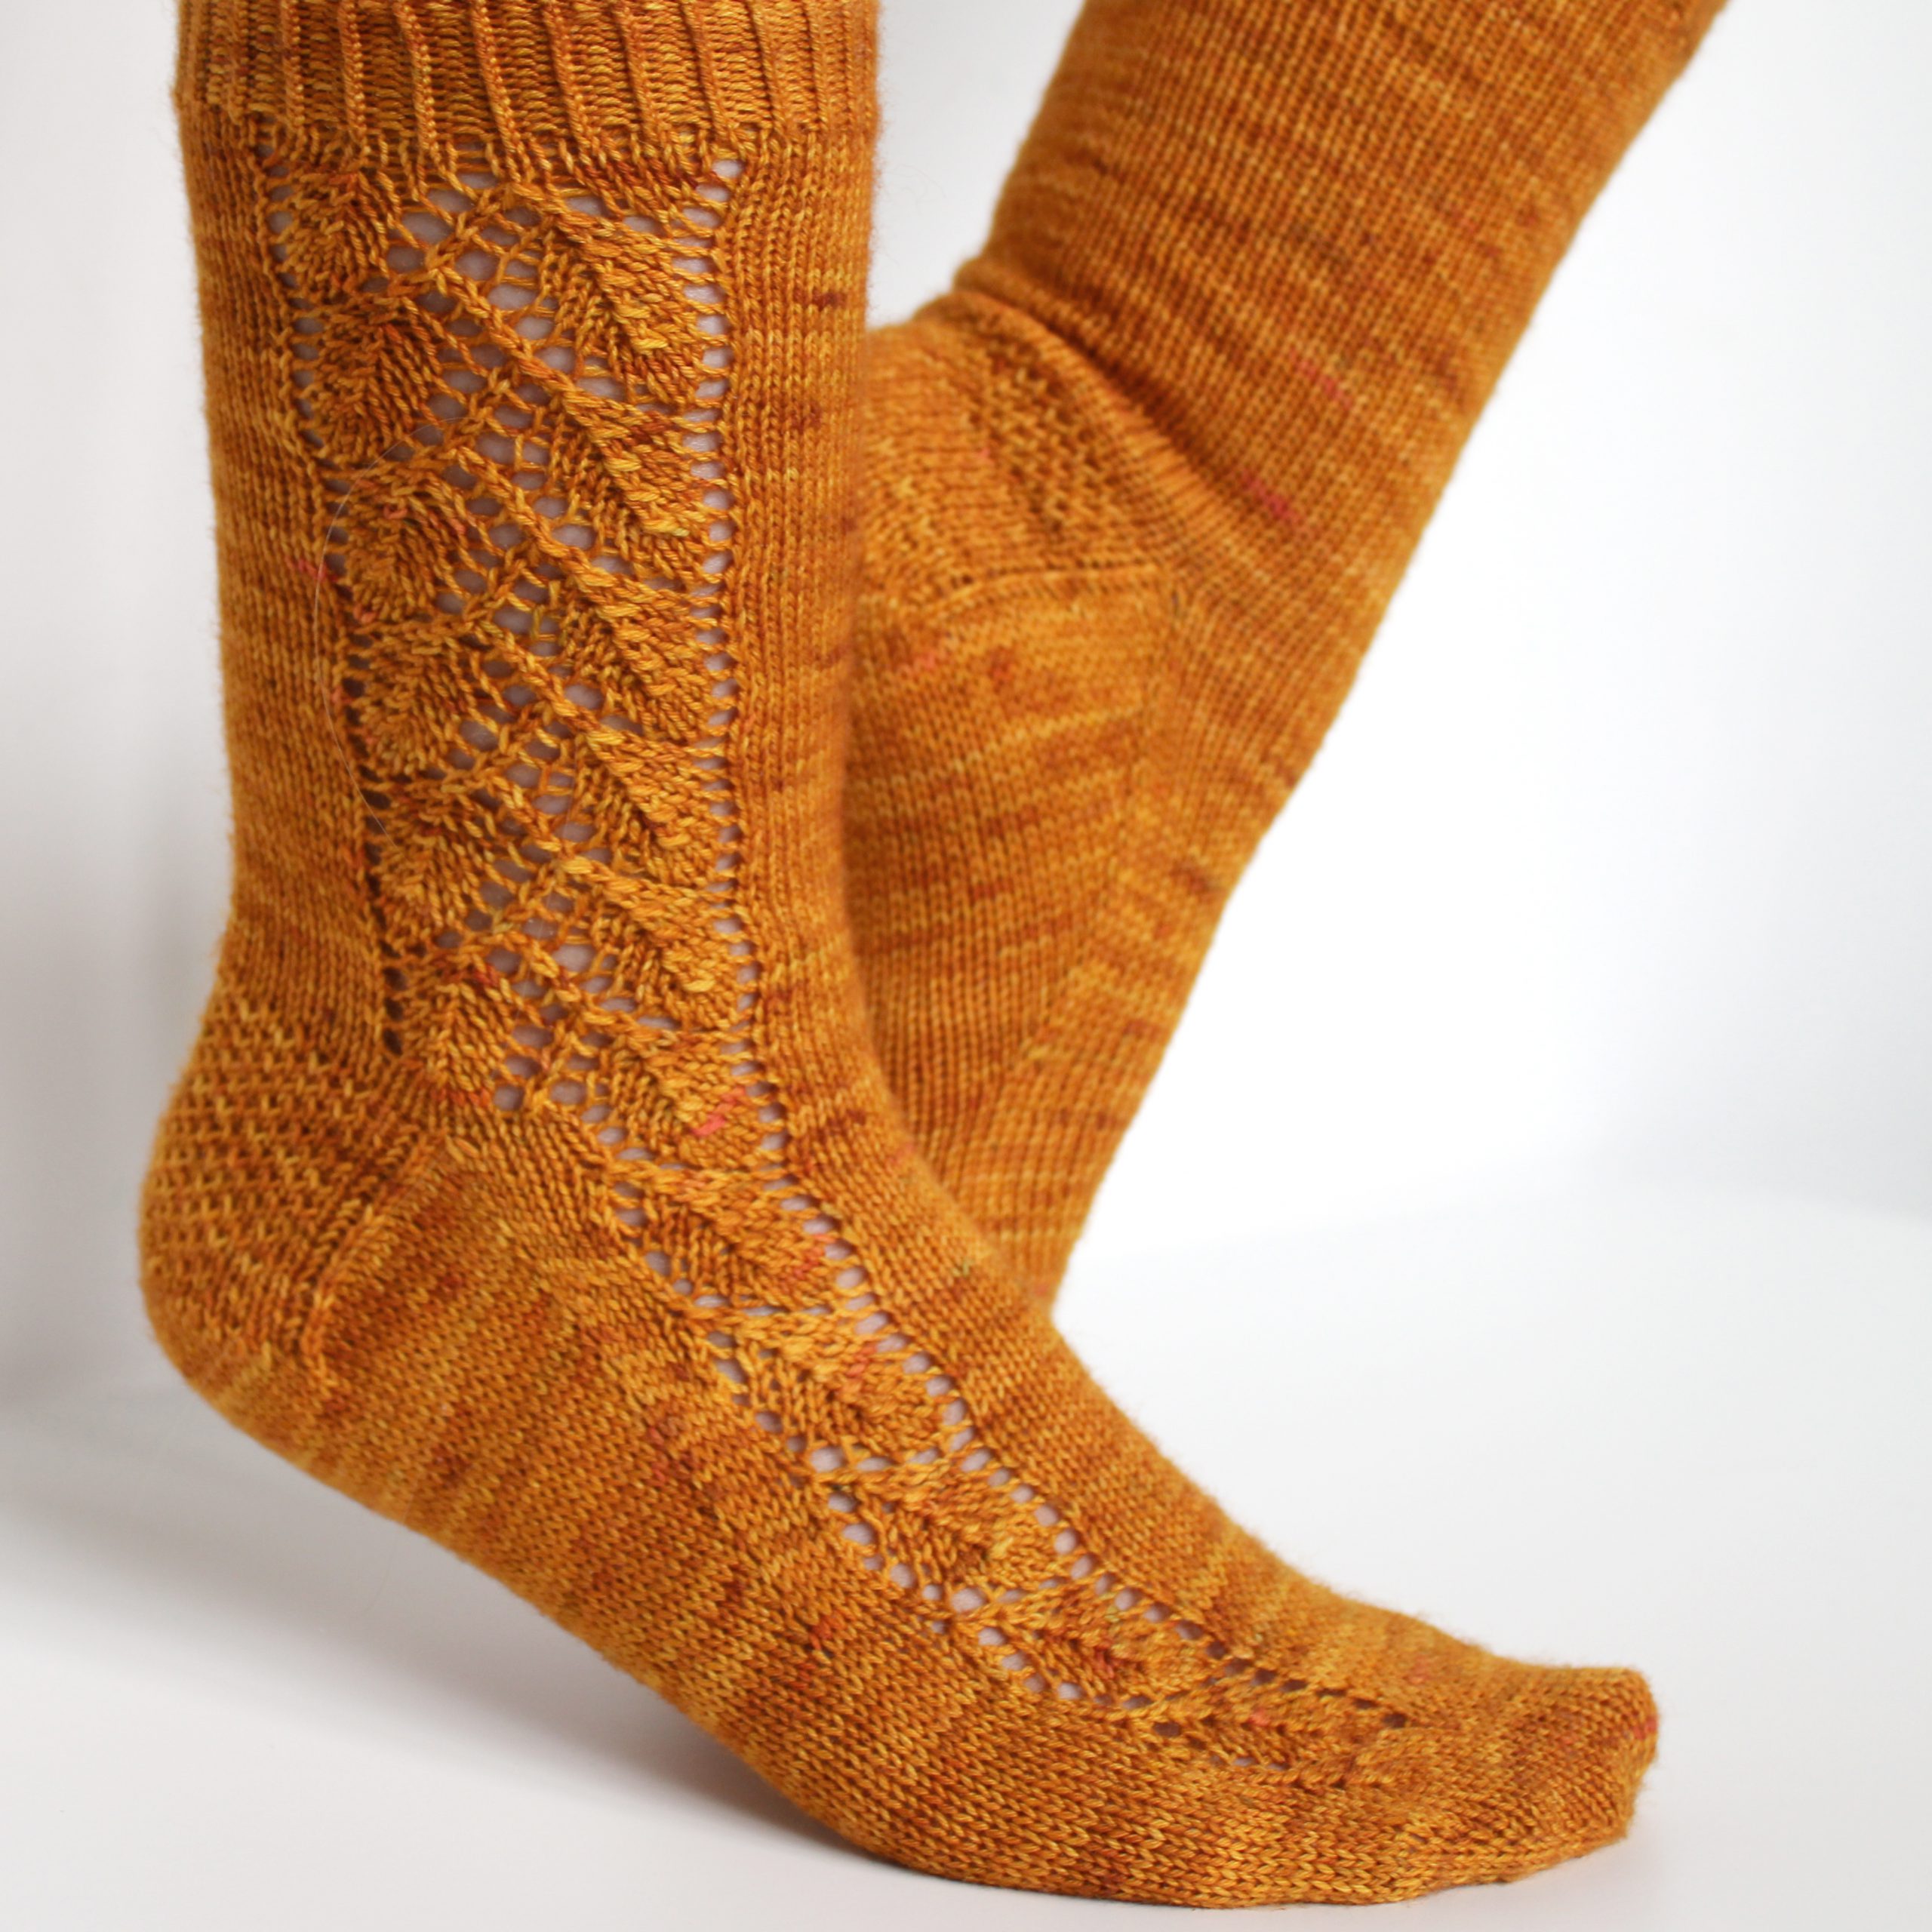 Orange socks with a lace leaf pattern up the foot and leg